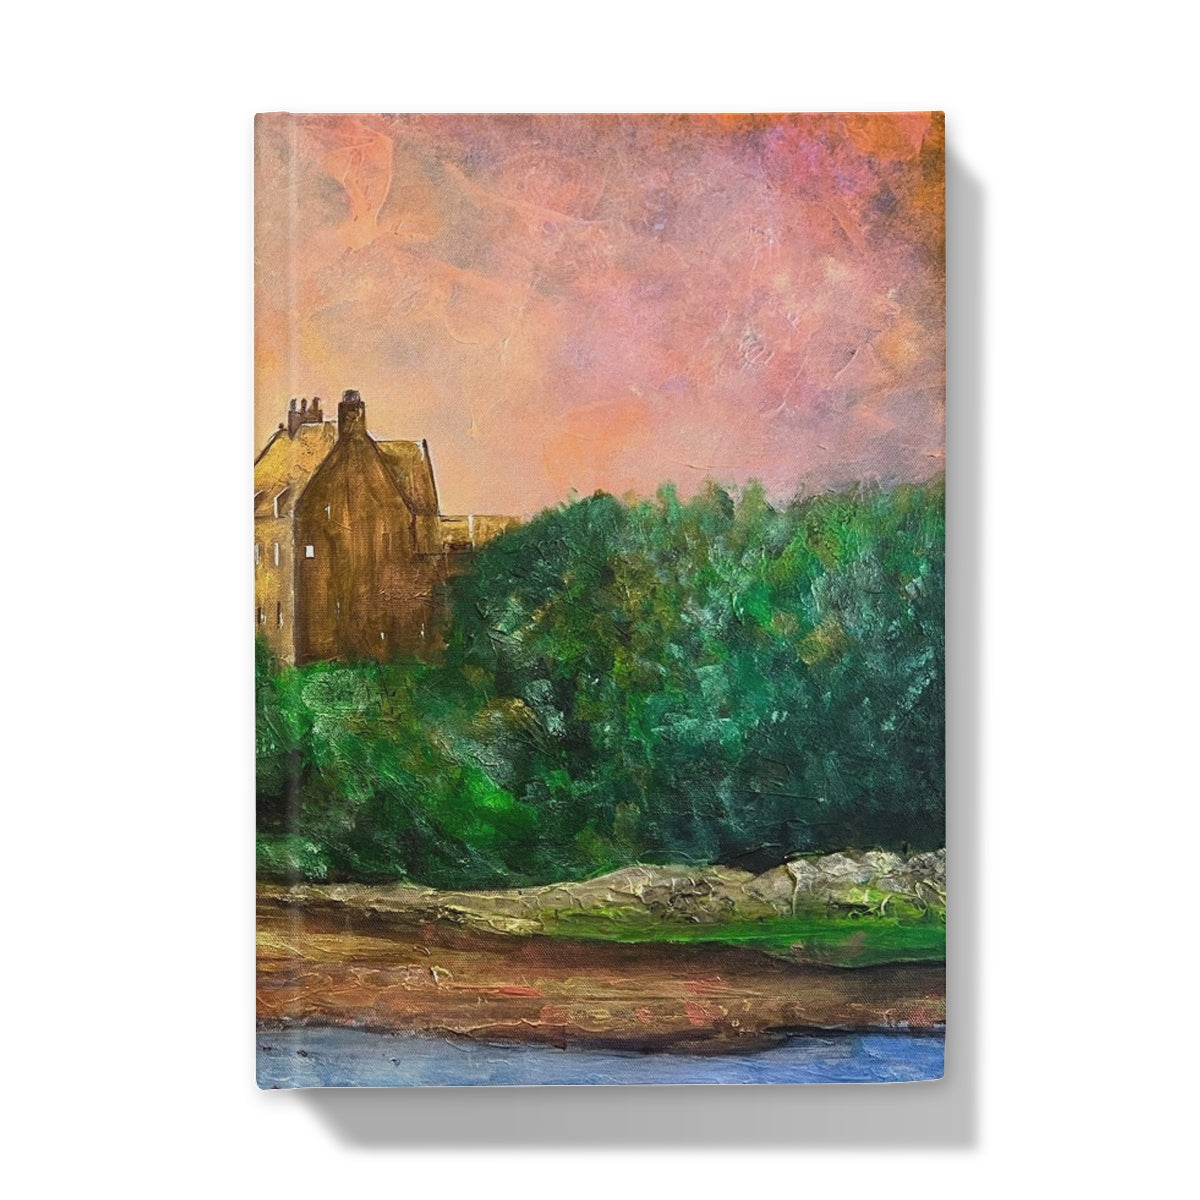 Duntrune Castle Art Gifts Hardback Journal-Journals & Notebooks-Historic & Iconic Scotland Art Gallery-A4-Plain-Paintings, Prints, Homeware, Art Gifts From Scotland By Scottish Artist Kevin Hunter